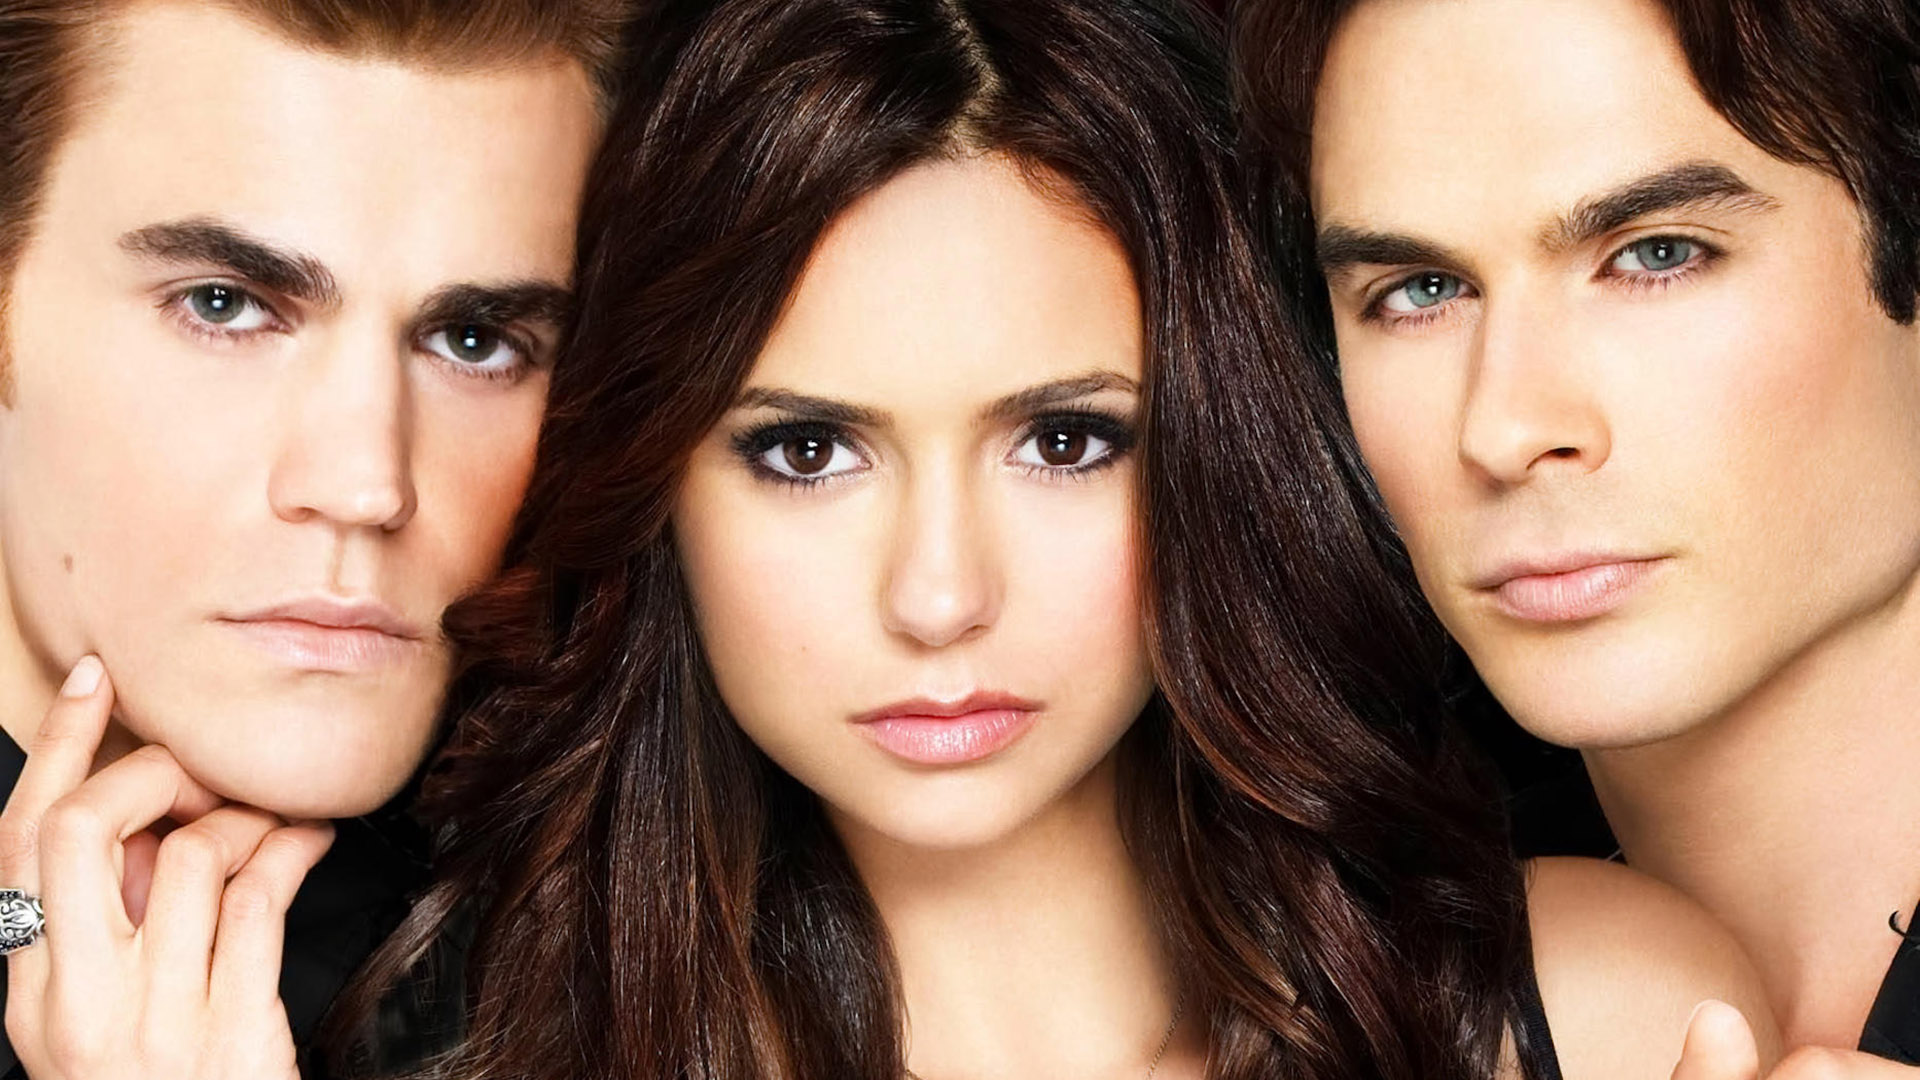 The Vampire Diaries: 7 Unforgettable Guest Stars Who Stole the Show